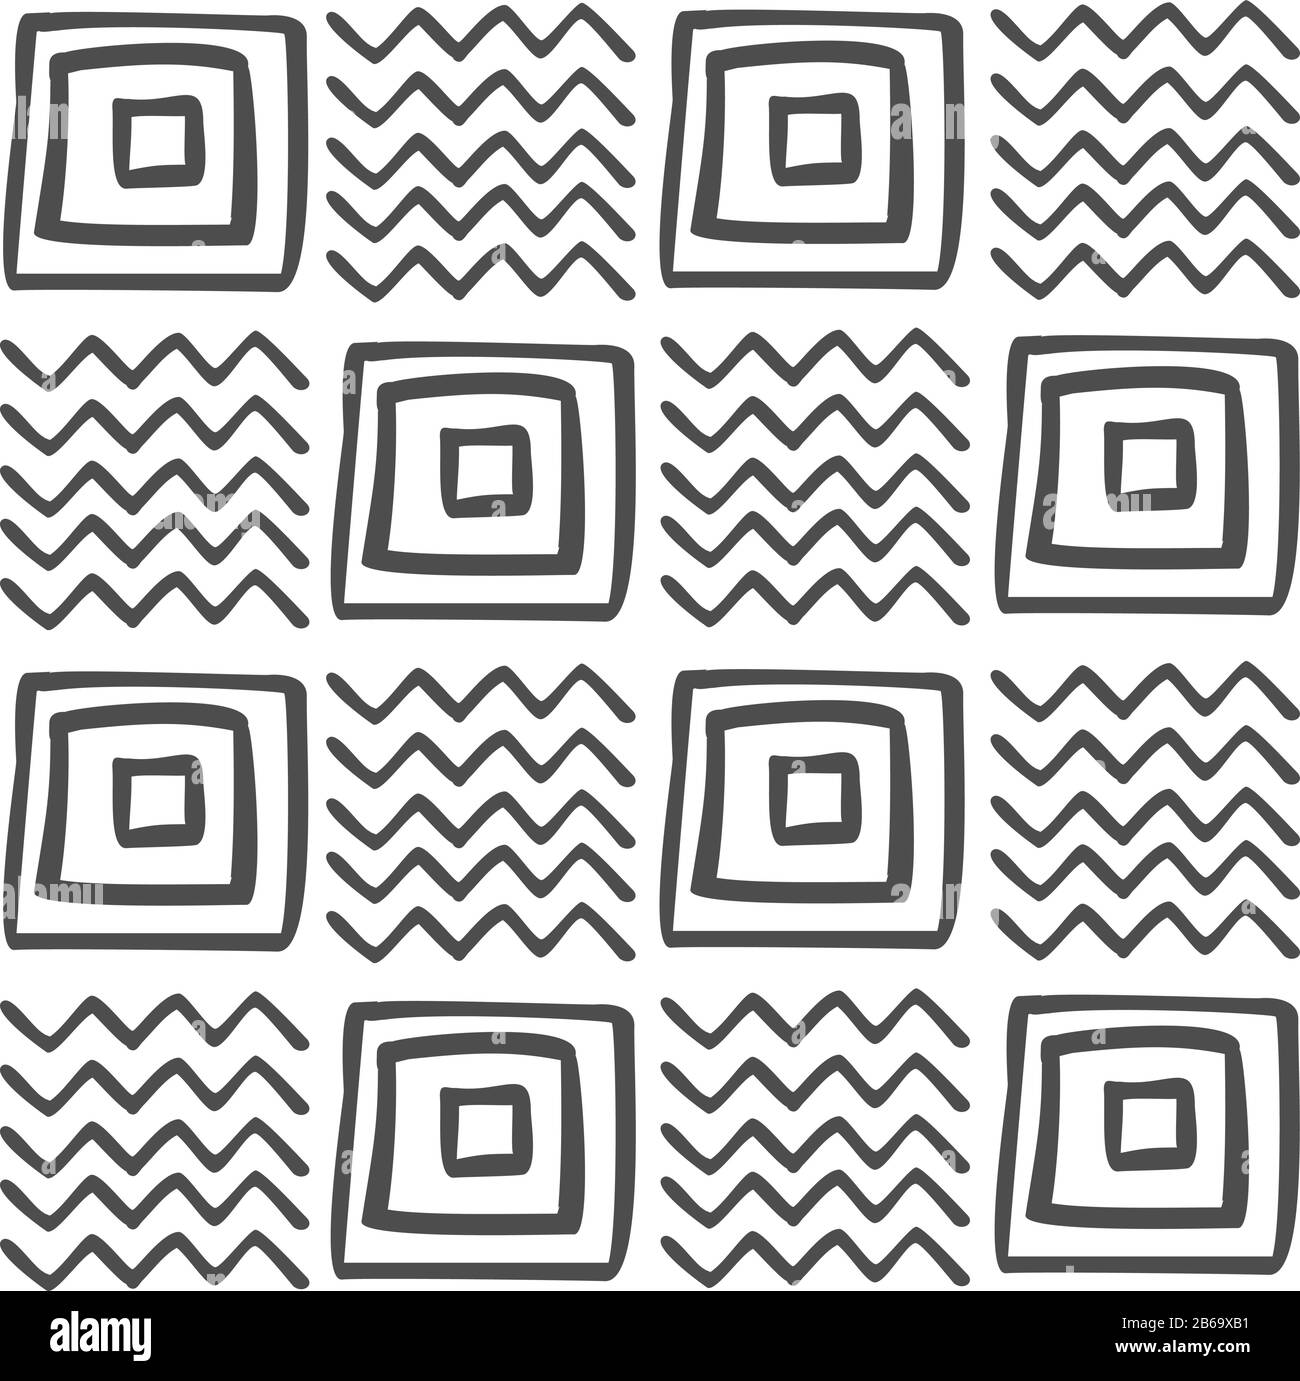 Vector seamless black and white geometric pattern of hand-drawn squares and zigzags. Black pattern on a white background. For decor, textile, fabric, Stock Vector